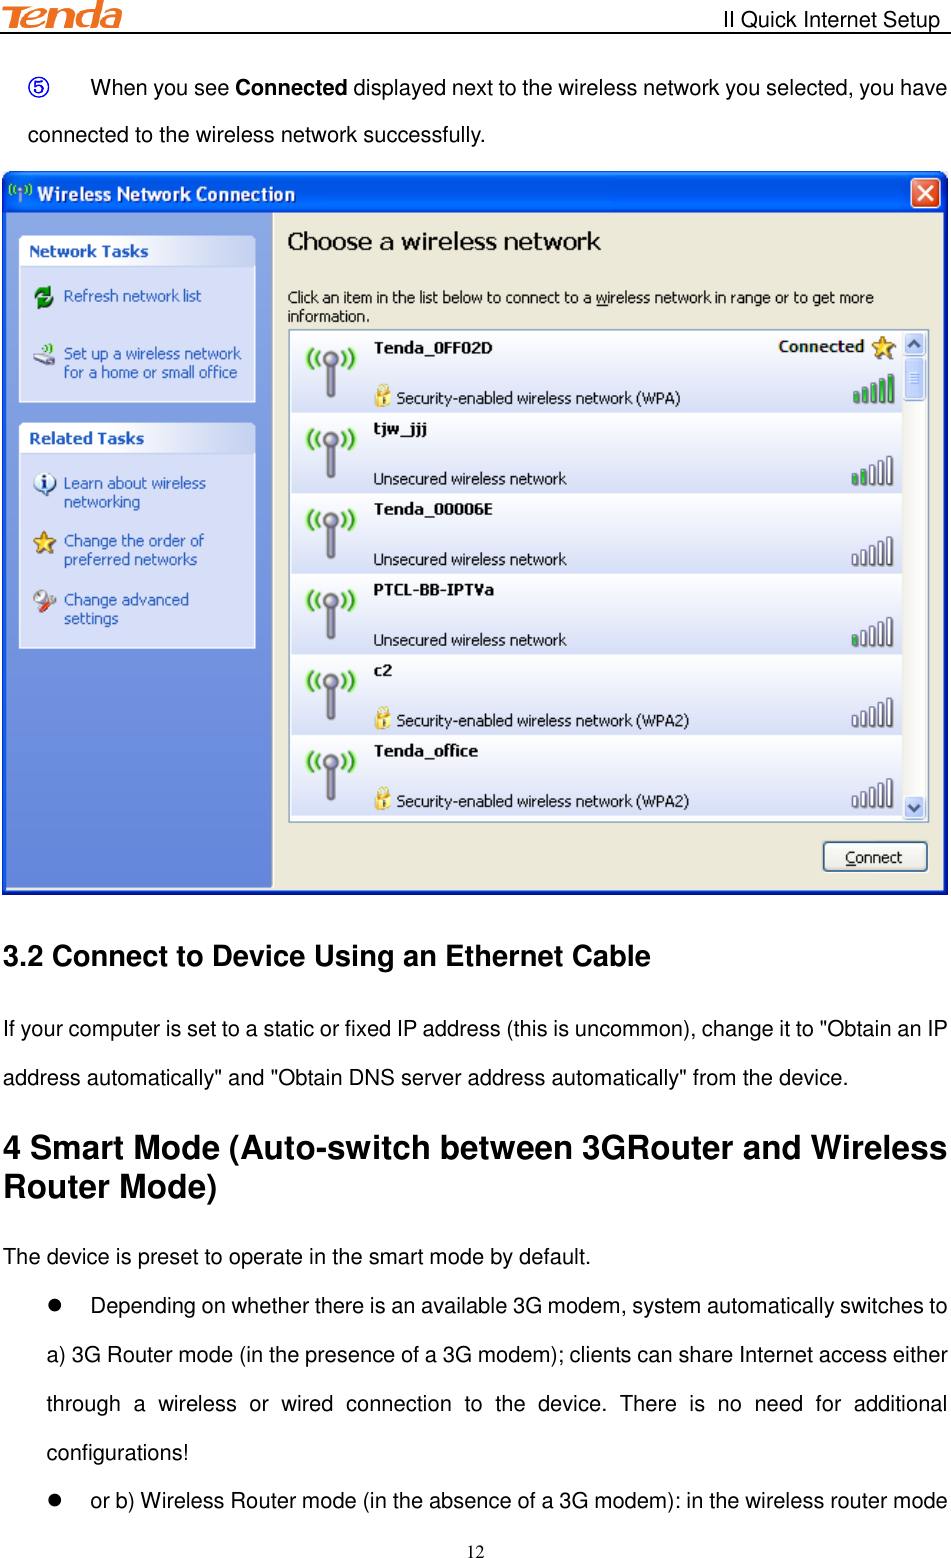                                                        II Quick Internet Setup         12 ⑤ When you see Connected displayed next to the wireless network you selected, you have connected to the wireless network successfully.  3.2 Connect to Device Using an Ethernet Cable If your computer is set to a static or fixed IP address (this is uncommon), change it to &quot;Obtain an IP address automatically&quot; and &quot;Obtain DNS server address automatically&quot; from the device. 4 Smart Mode (Auto-switch between 3GRouter and Wireless Router Mode) The device is preset to operate in the smart mode by default.   Depending on whether there is an available 3G modem, system automatically switches to   a) 3G Router mode (in the presence of a 3G modem); clients can share Internet access either through  a  wireless  or  wired  connection  to  the  device.  There  is  no  need  for  additional configurations!   or b) Wireless Router mode (in the absence of a 3G modem): in the wireless router mode 